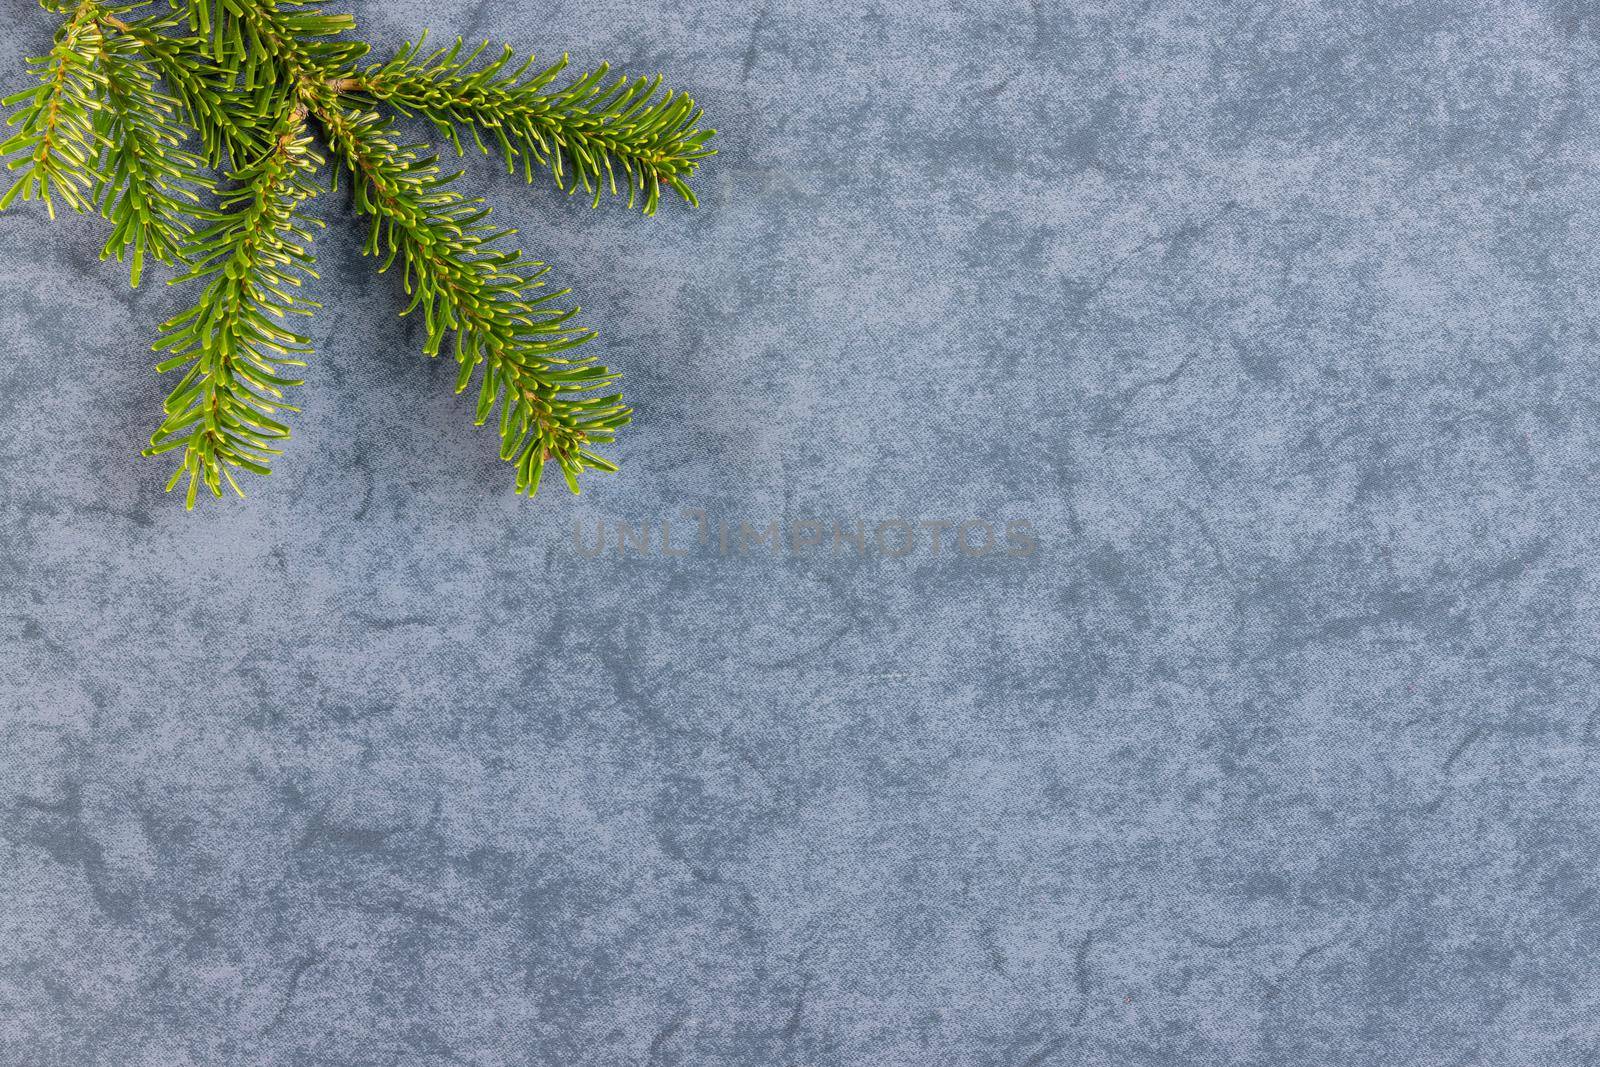 Christmas motif, texture, background with branches of a Nordmann fir at the top on a dark grey blue marbled  background with free space for text. by reinerc